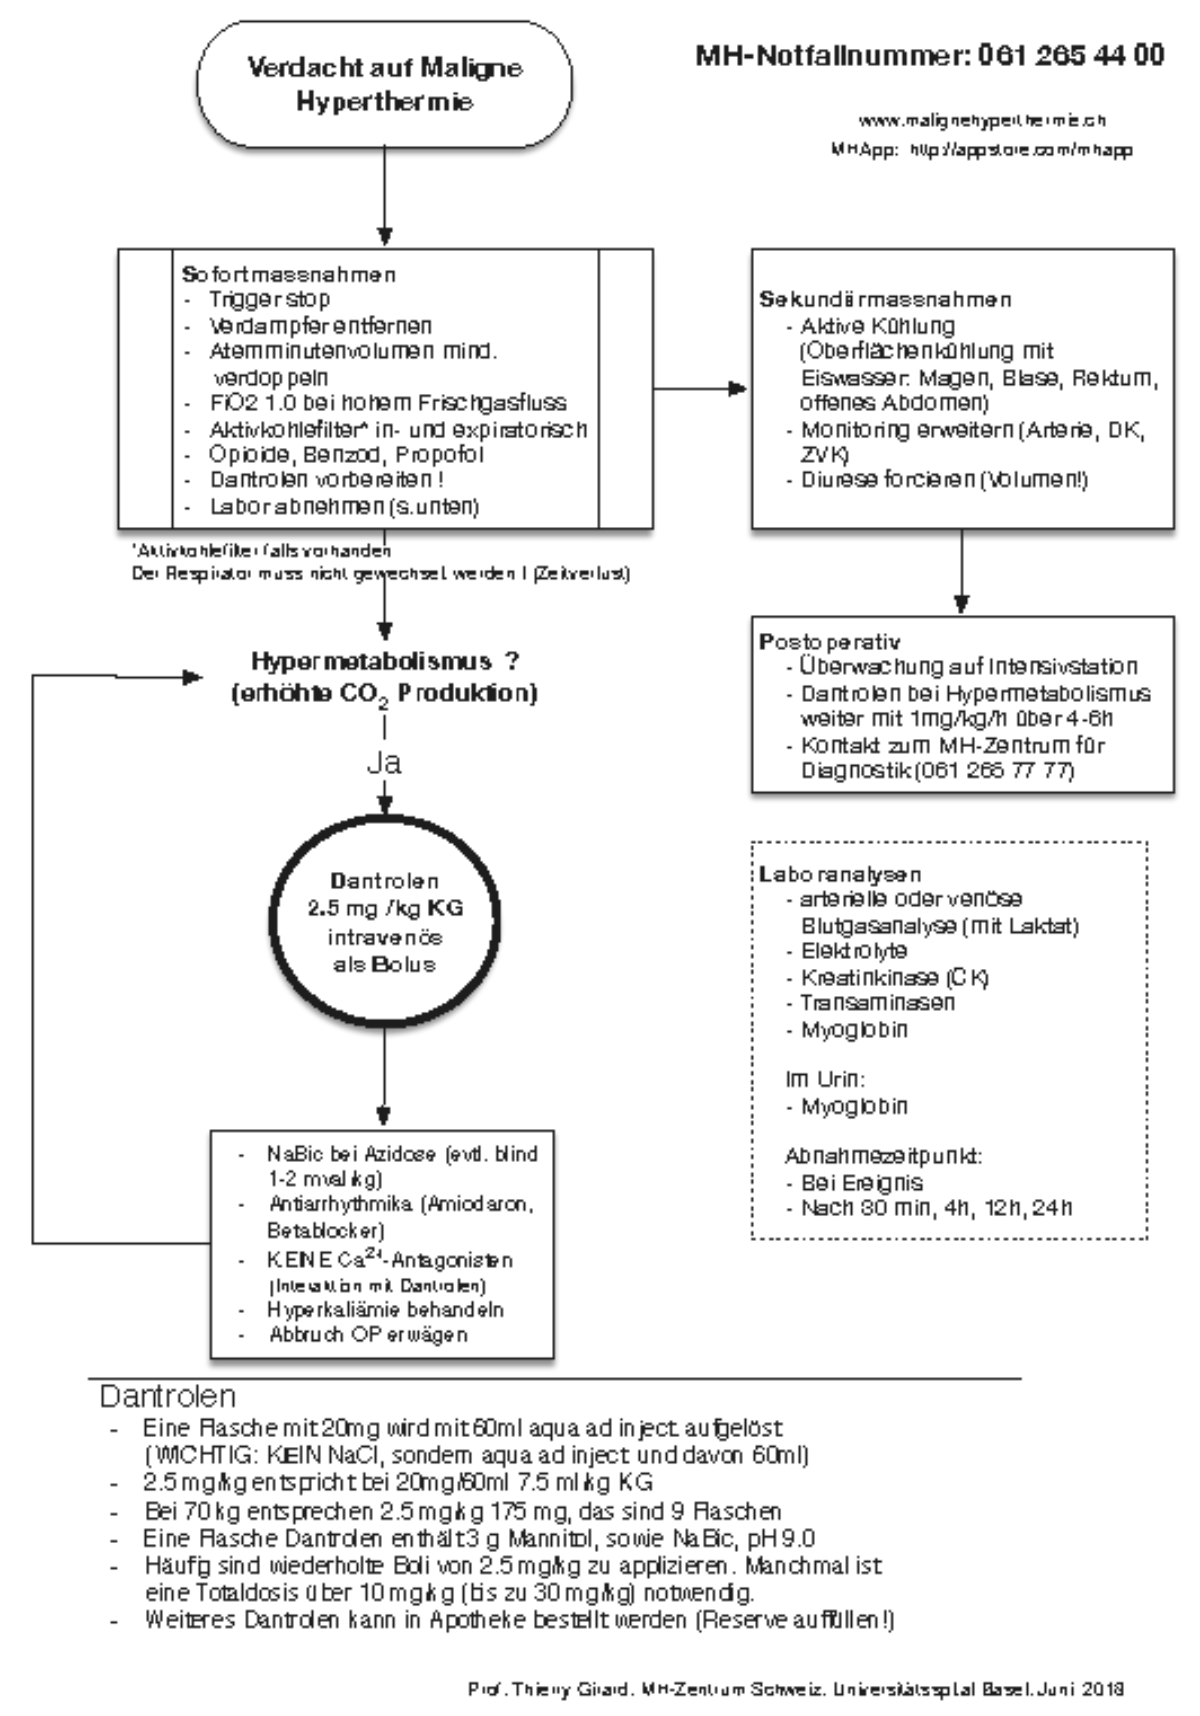 Action plan in an emergency Malignant hyperthermia